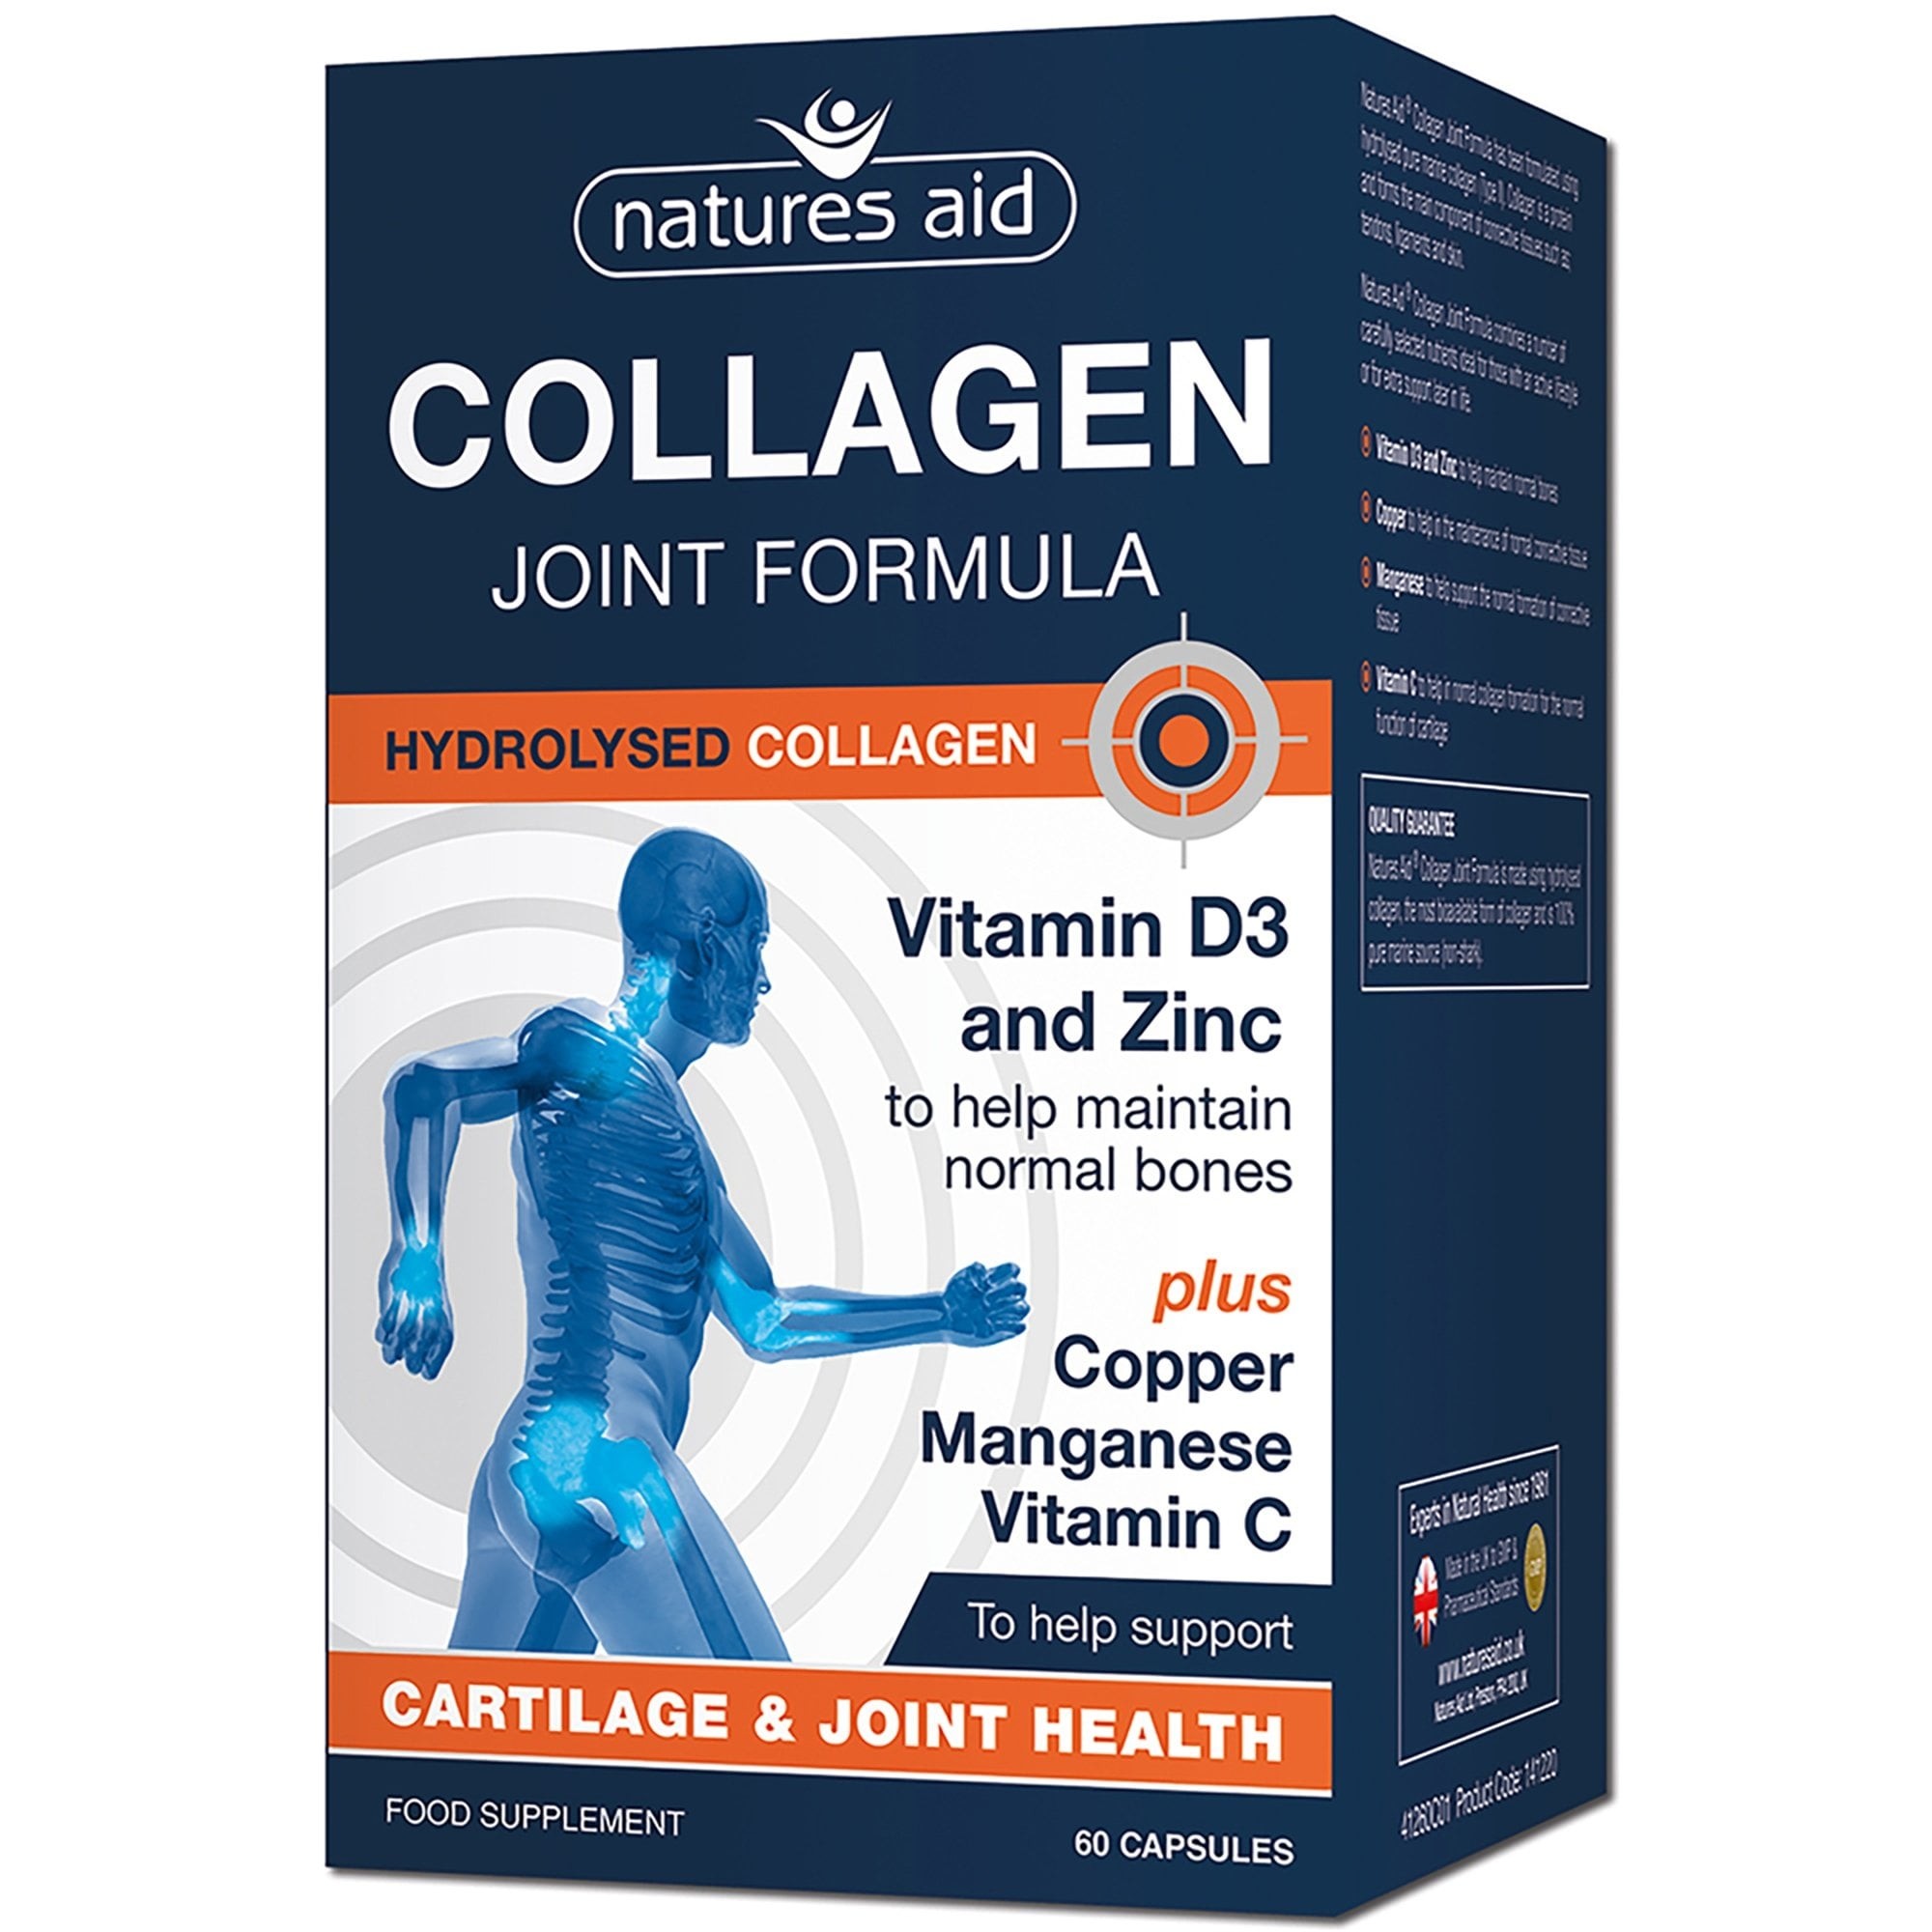 Natures Aid - Collagen Joint Formula